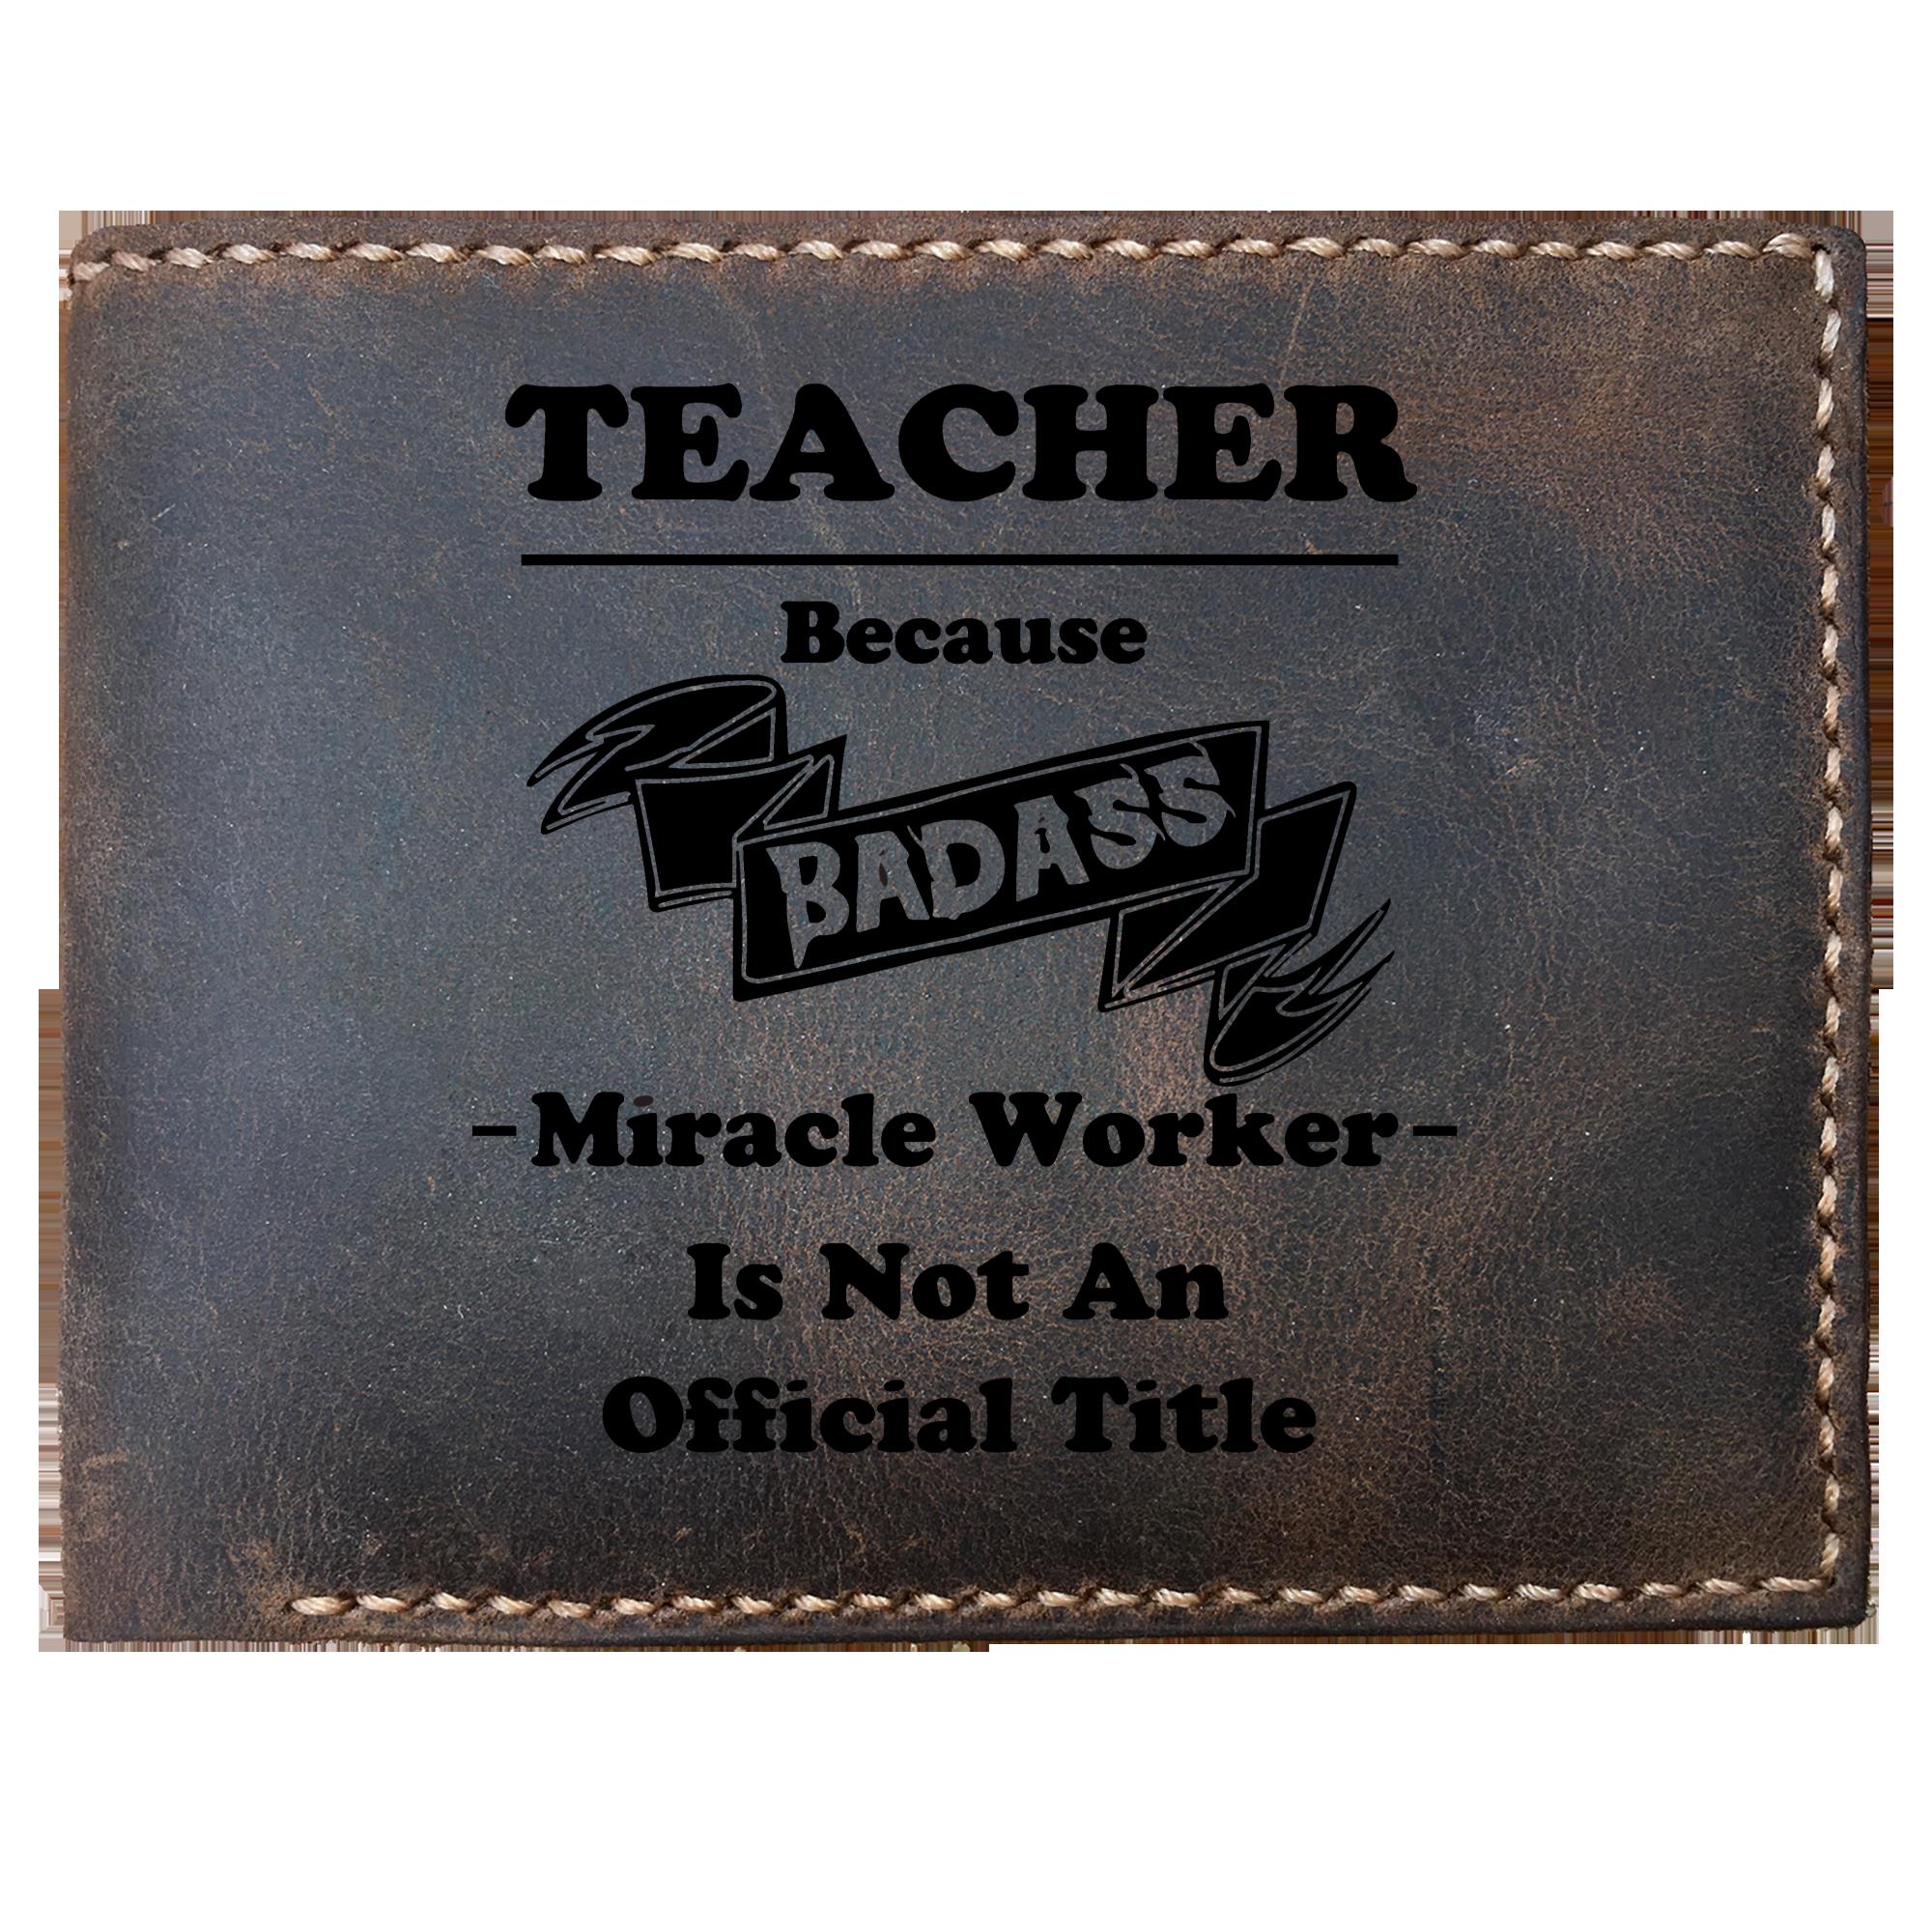 Skitongifts Funny Custom Laser Engraved Bifold Leather Wallet, Teacher Because Badass Miracle Worker Is Not An Official Title Best Teacher's Day